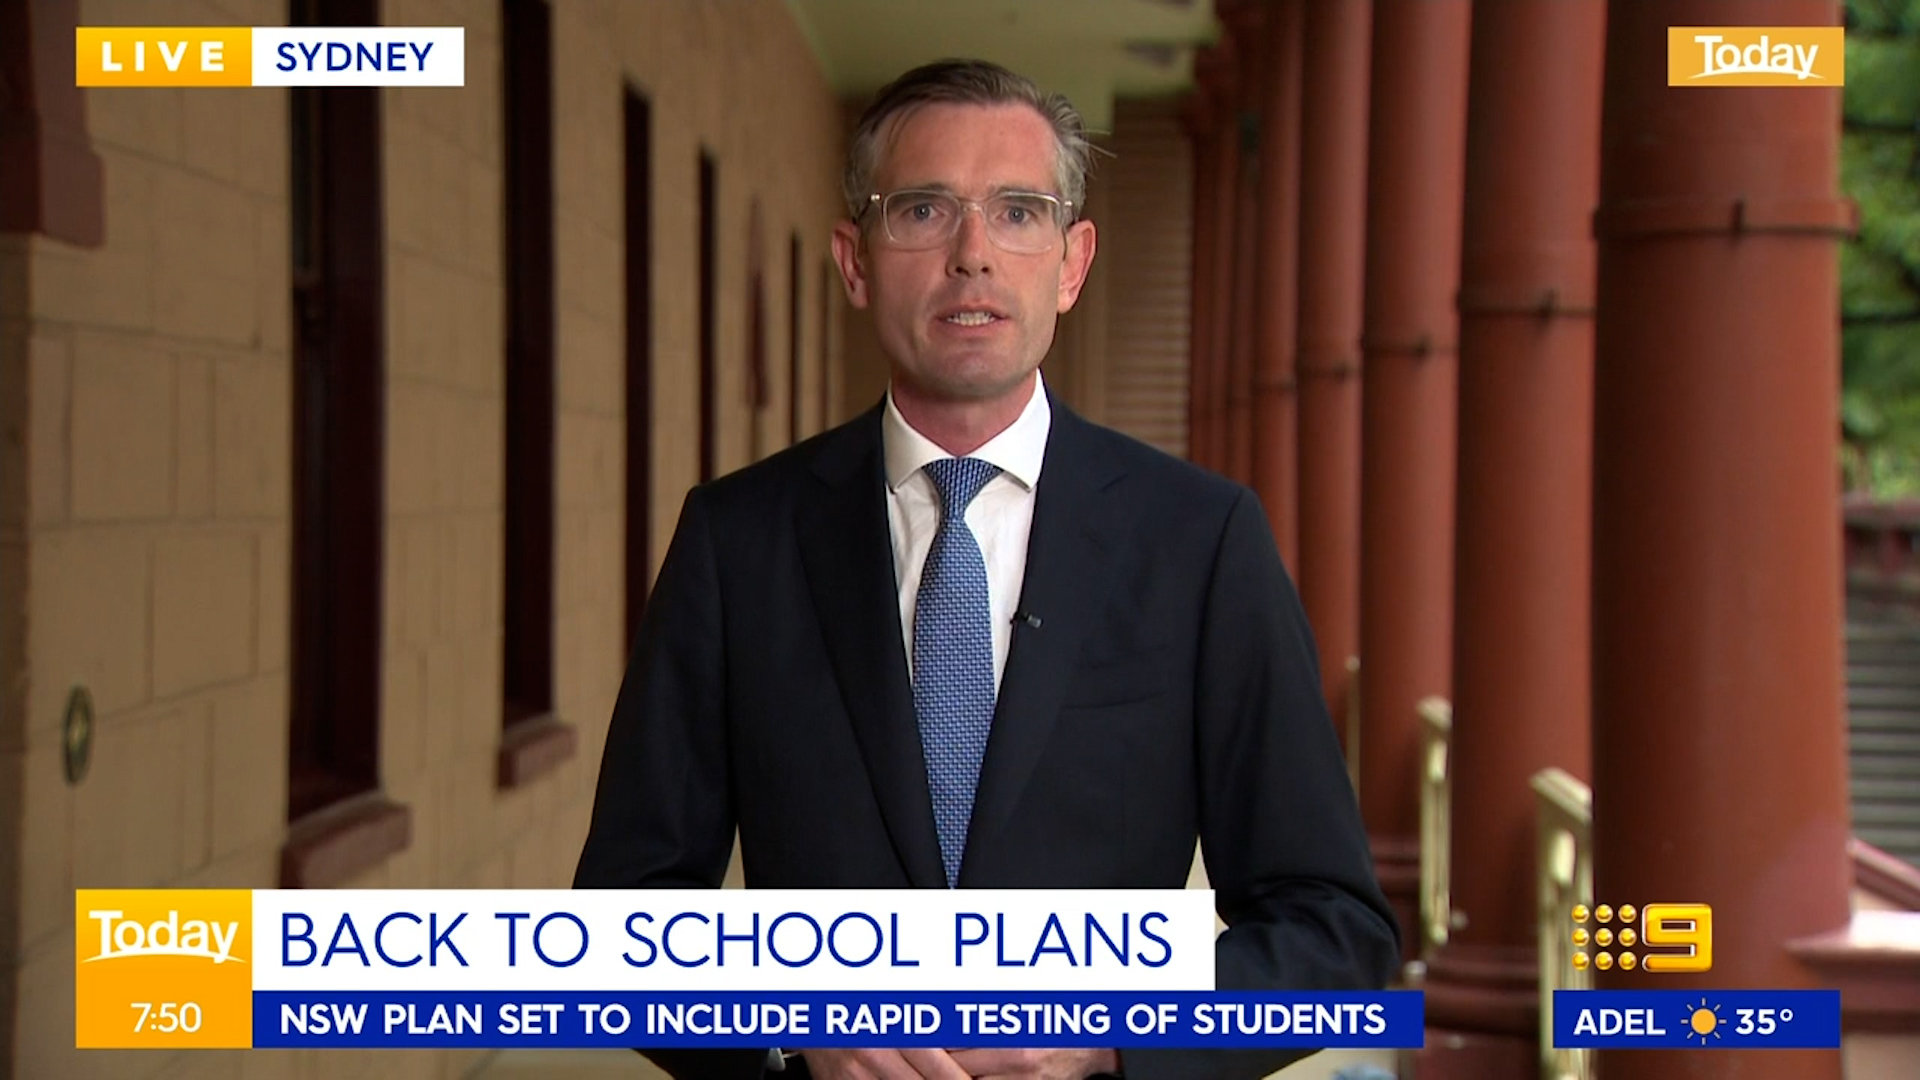 Rapid testing to help get kids back to school as planned in NSW